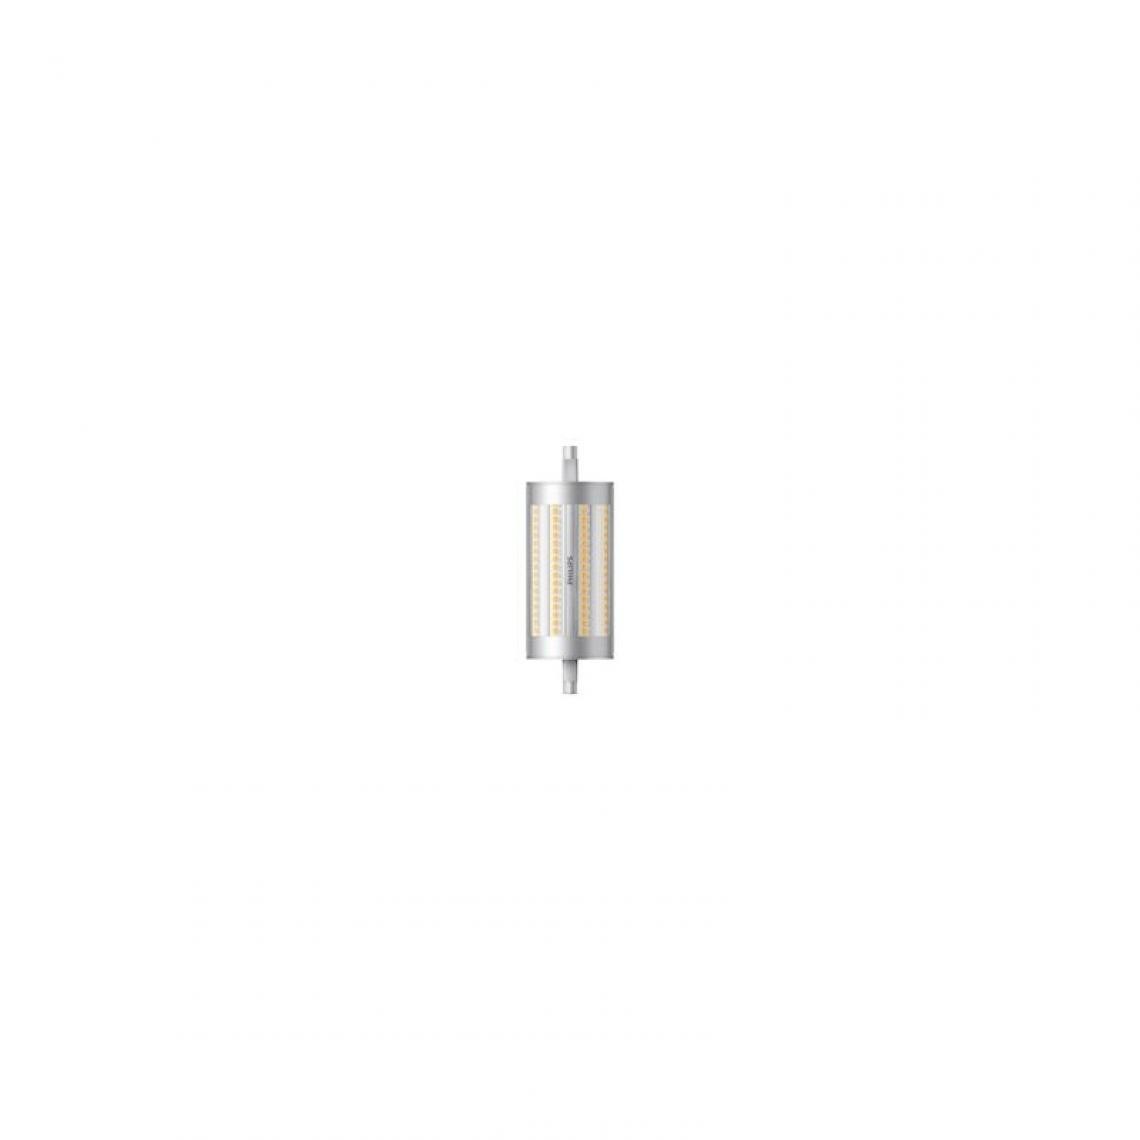 Philips - CoreProLED linearD 175150W R7S 118 840 - Ampoules LED